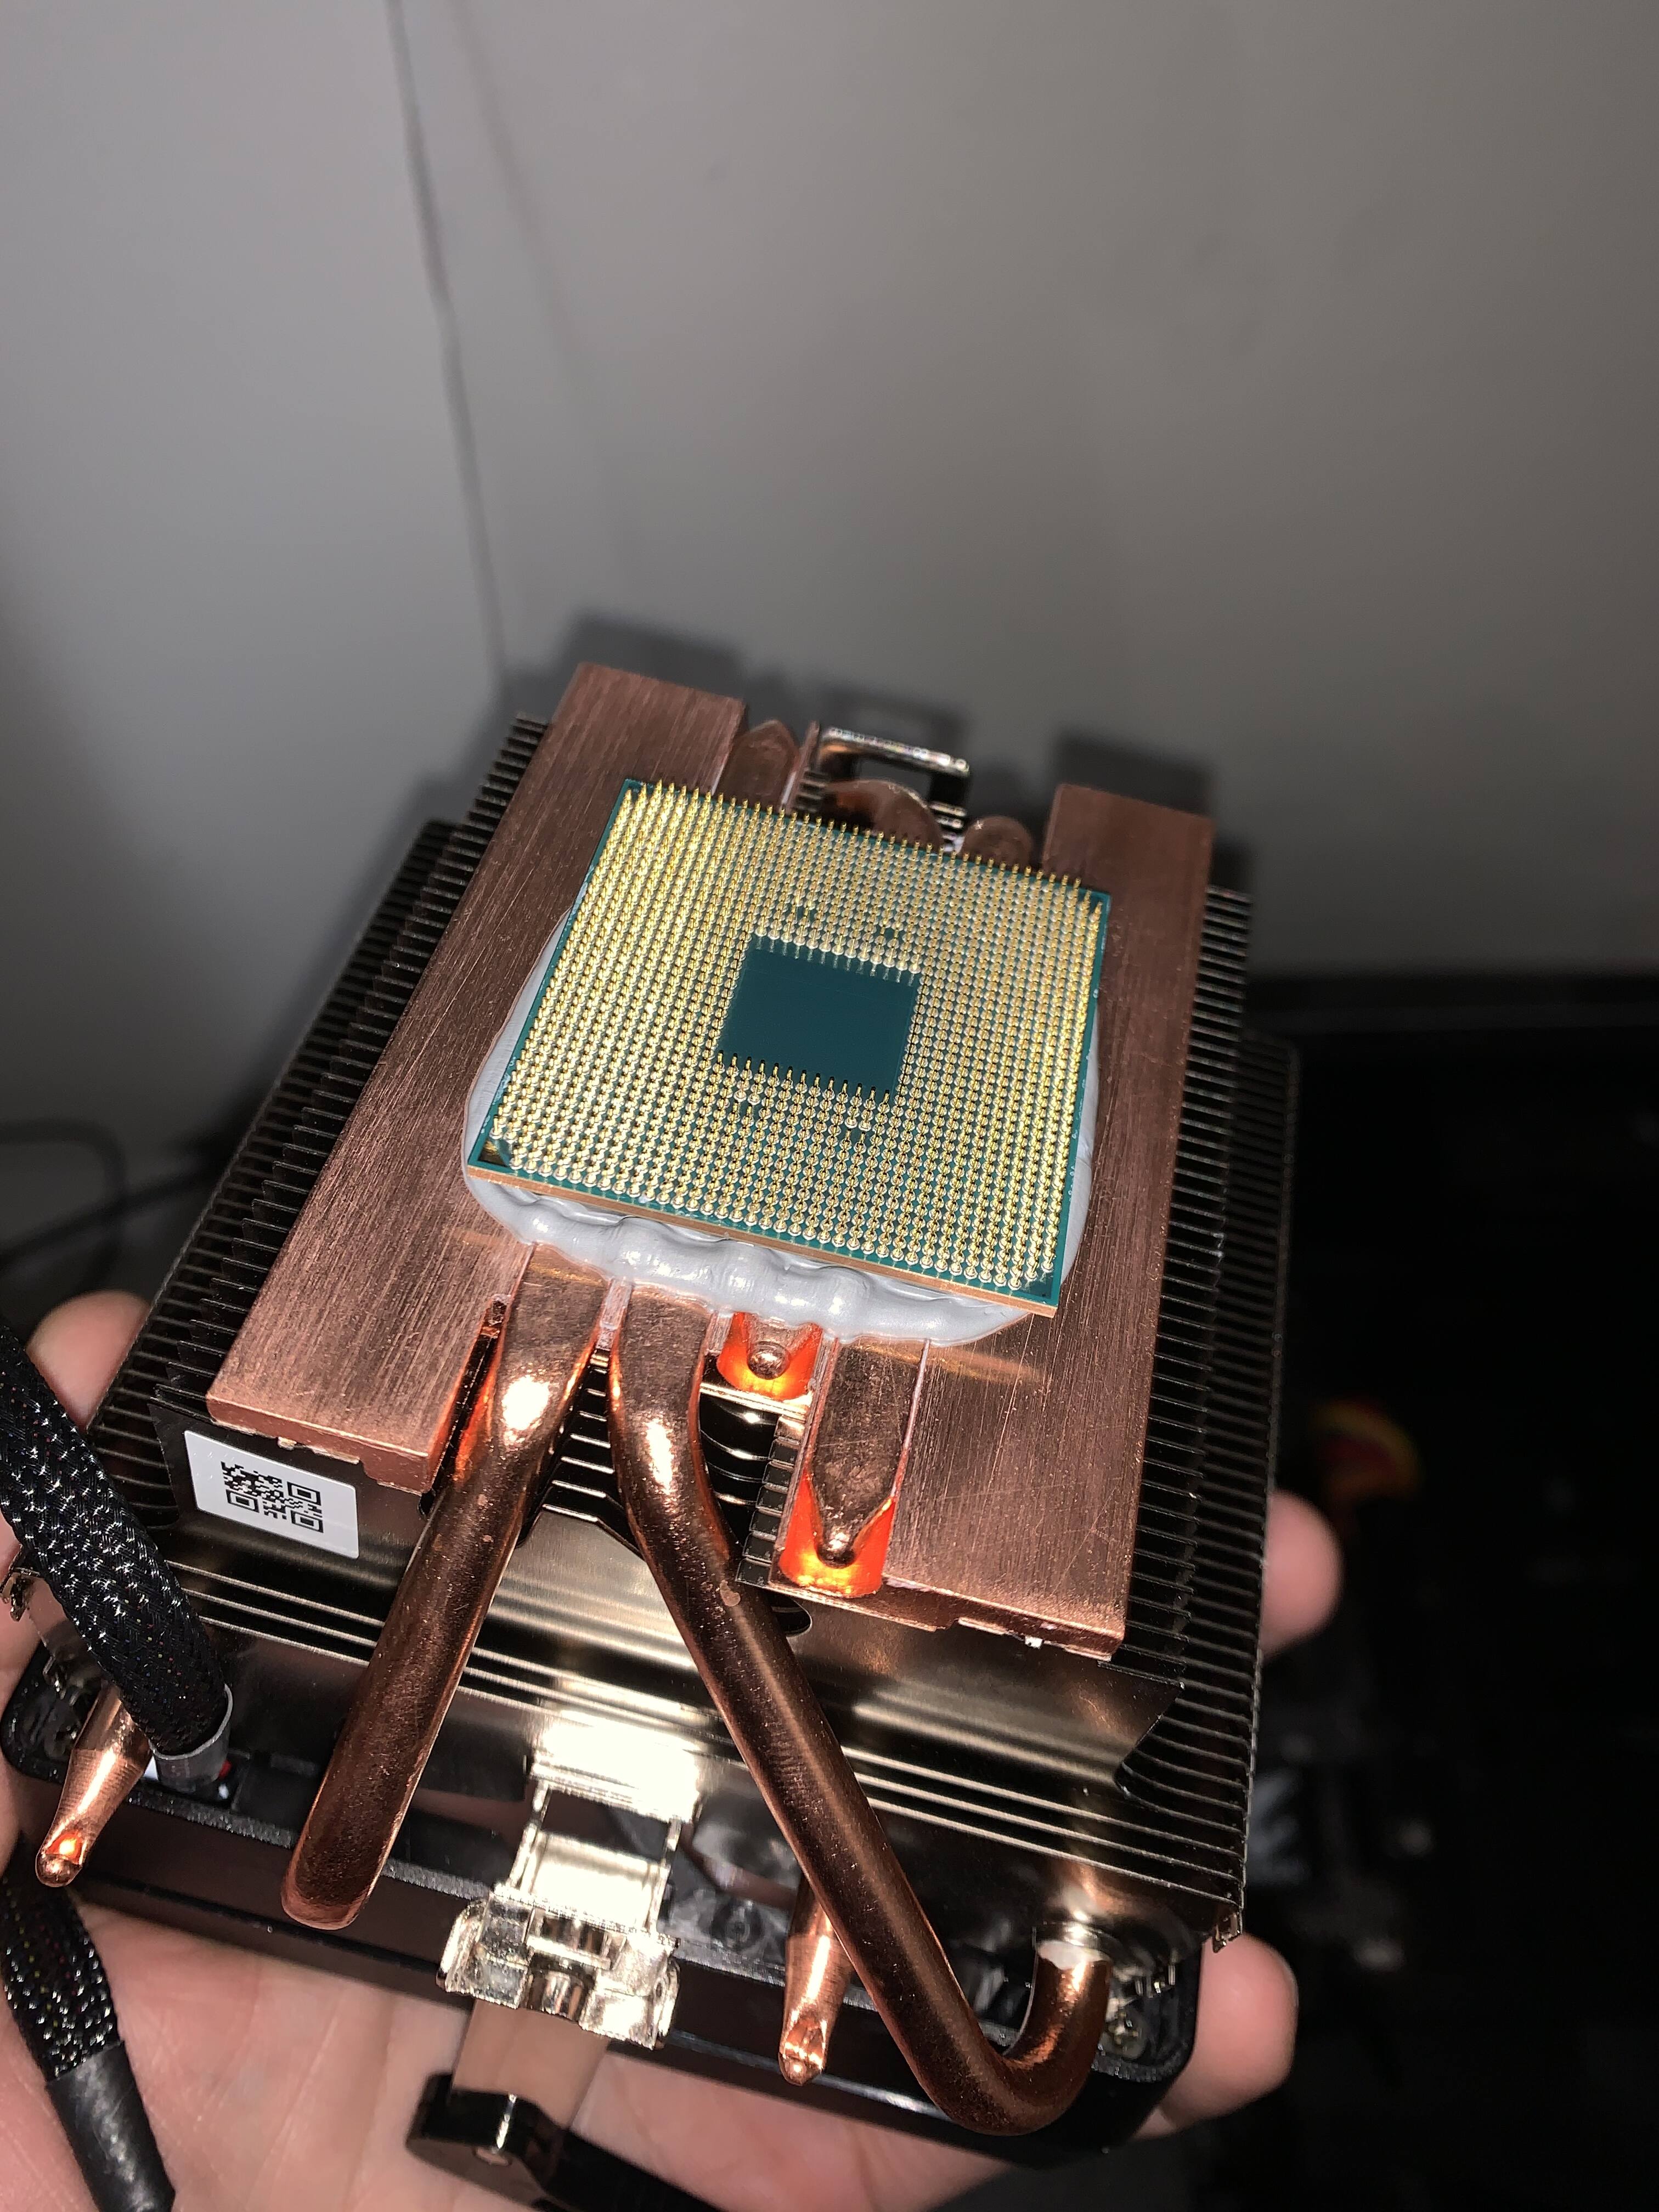 Is this too much thermal paste for GPU? First time doing it for a GPU cause  temps were high. (Noctua NT-H1 on 2070S) : r/pcmasterrace